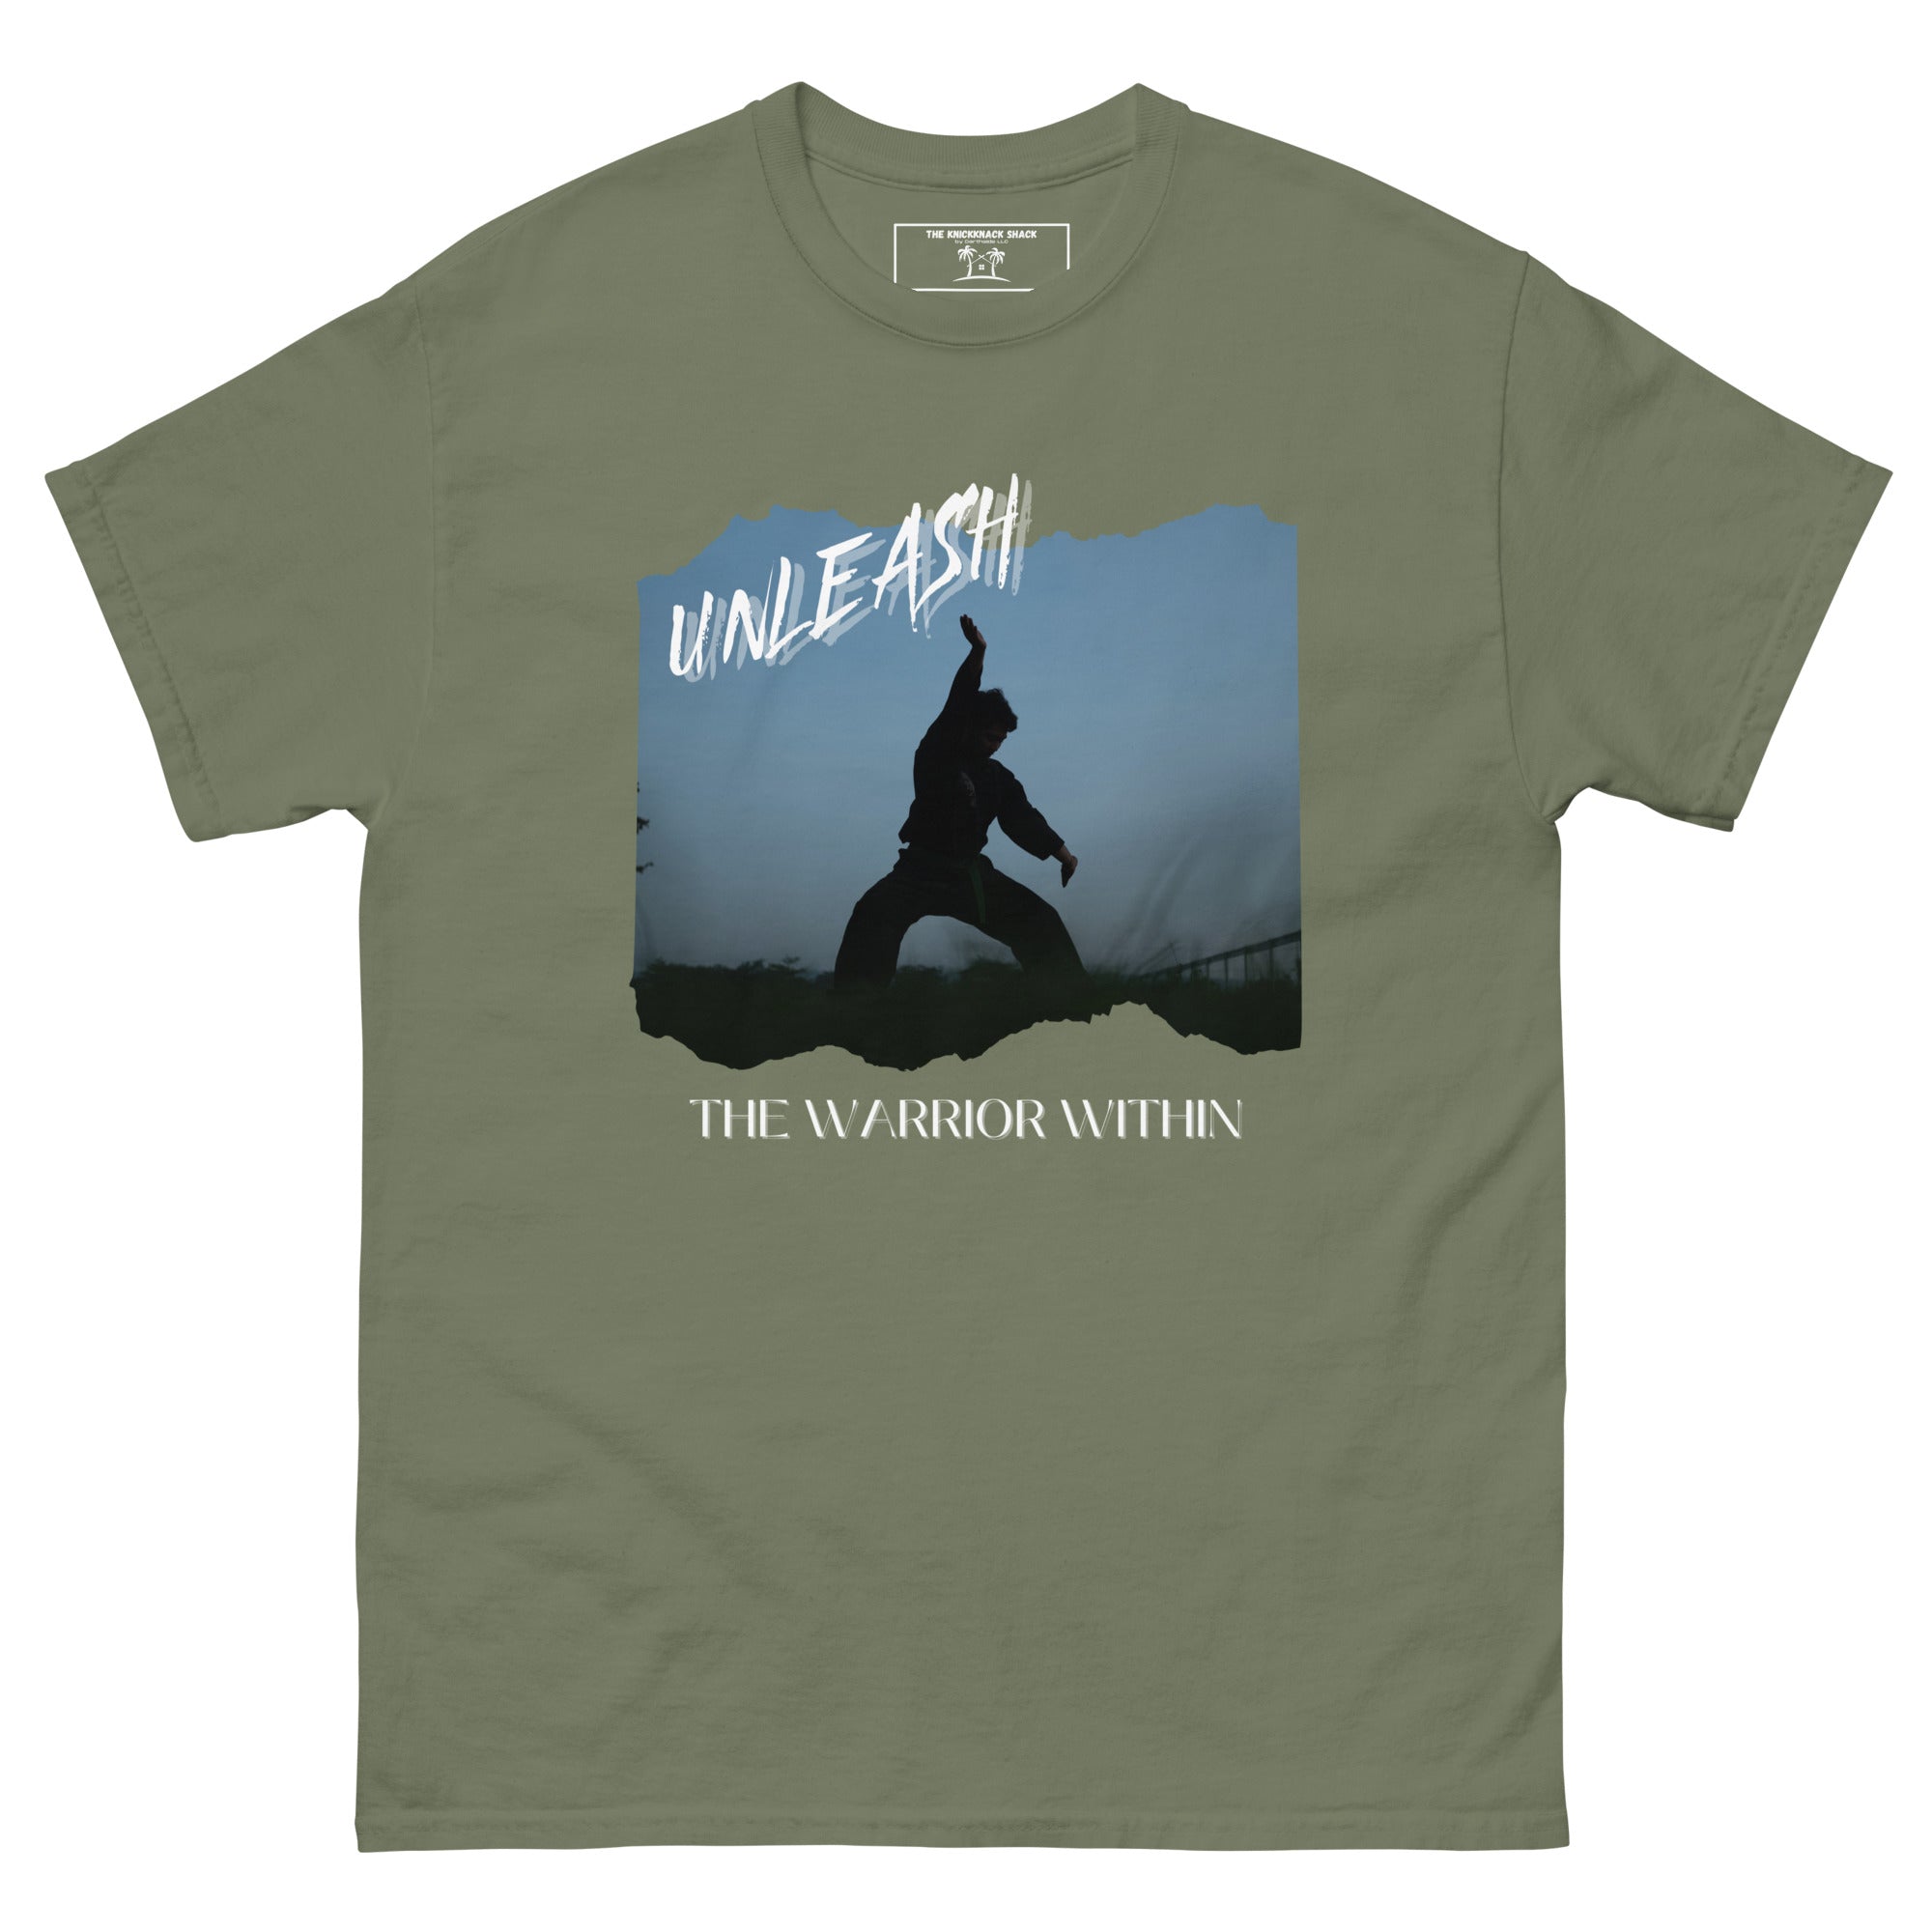 Tee-shirt classique - Warrior Within 3 (couleurs sombres)